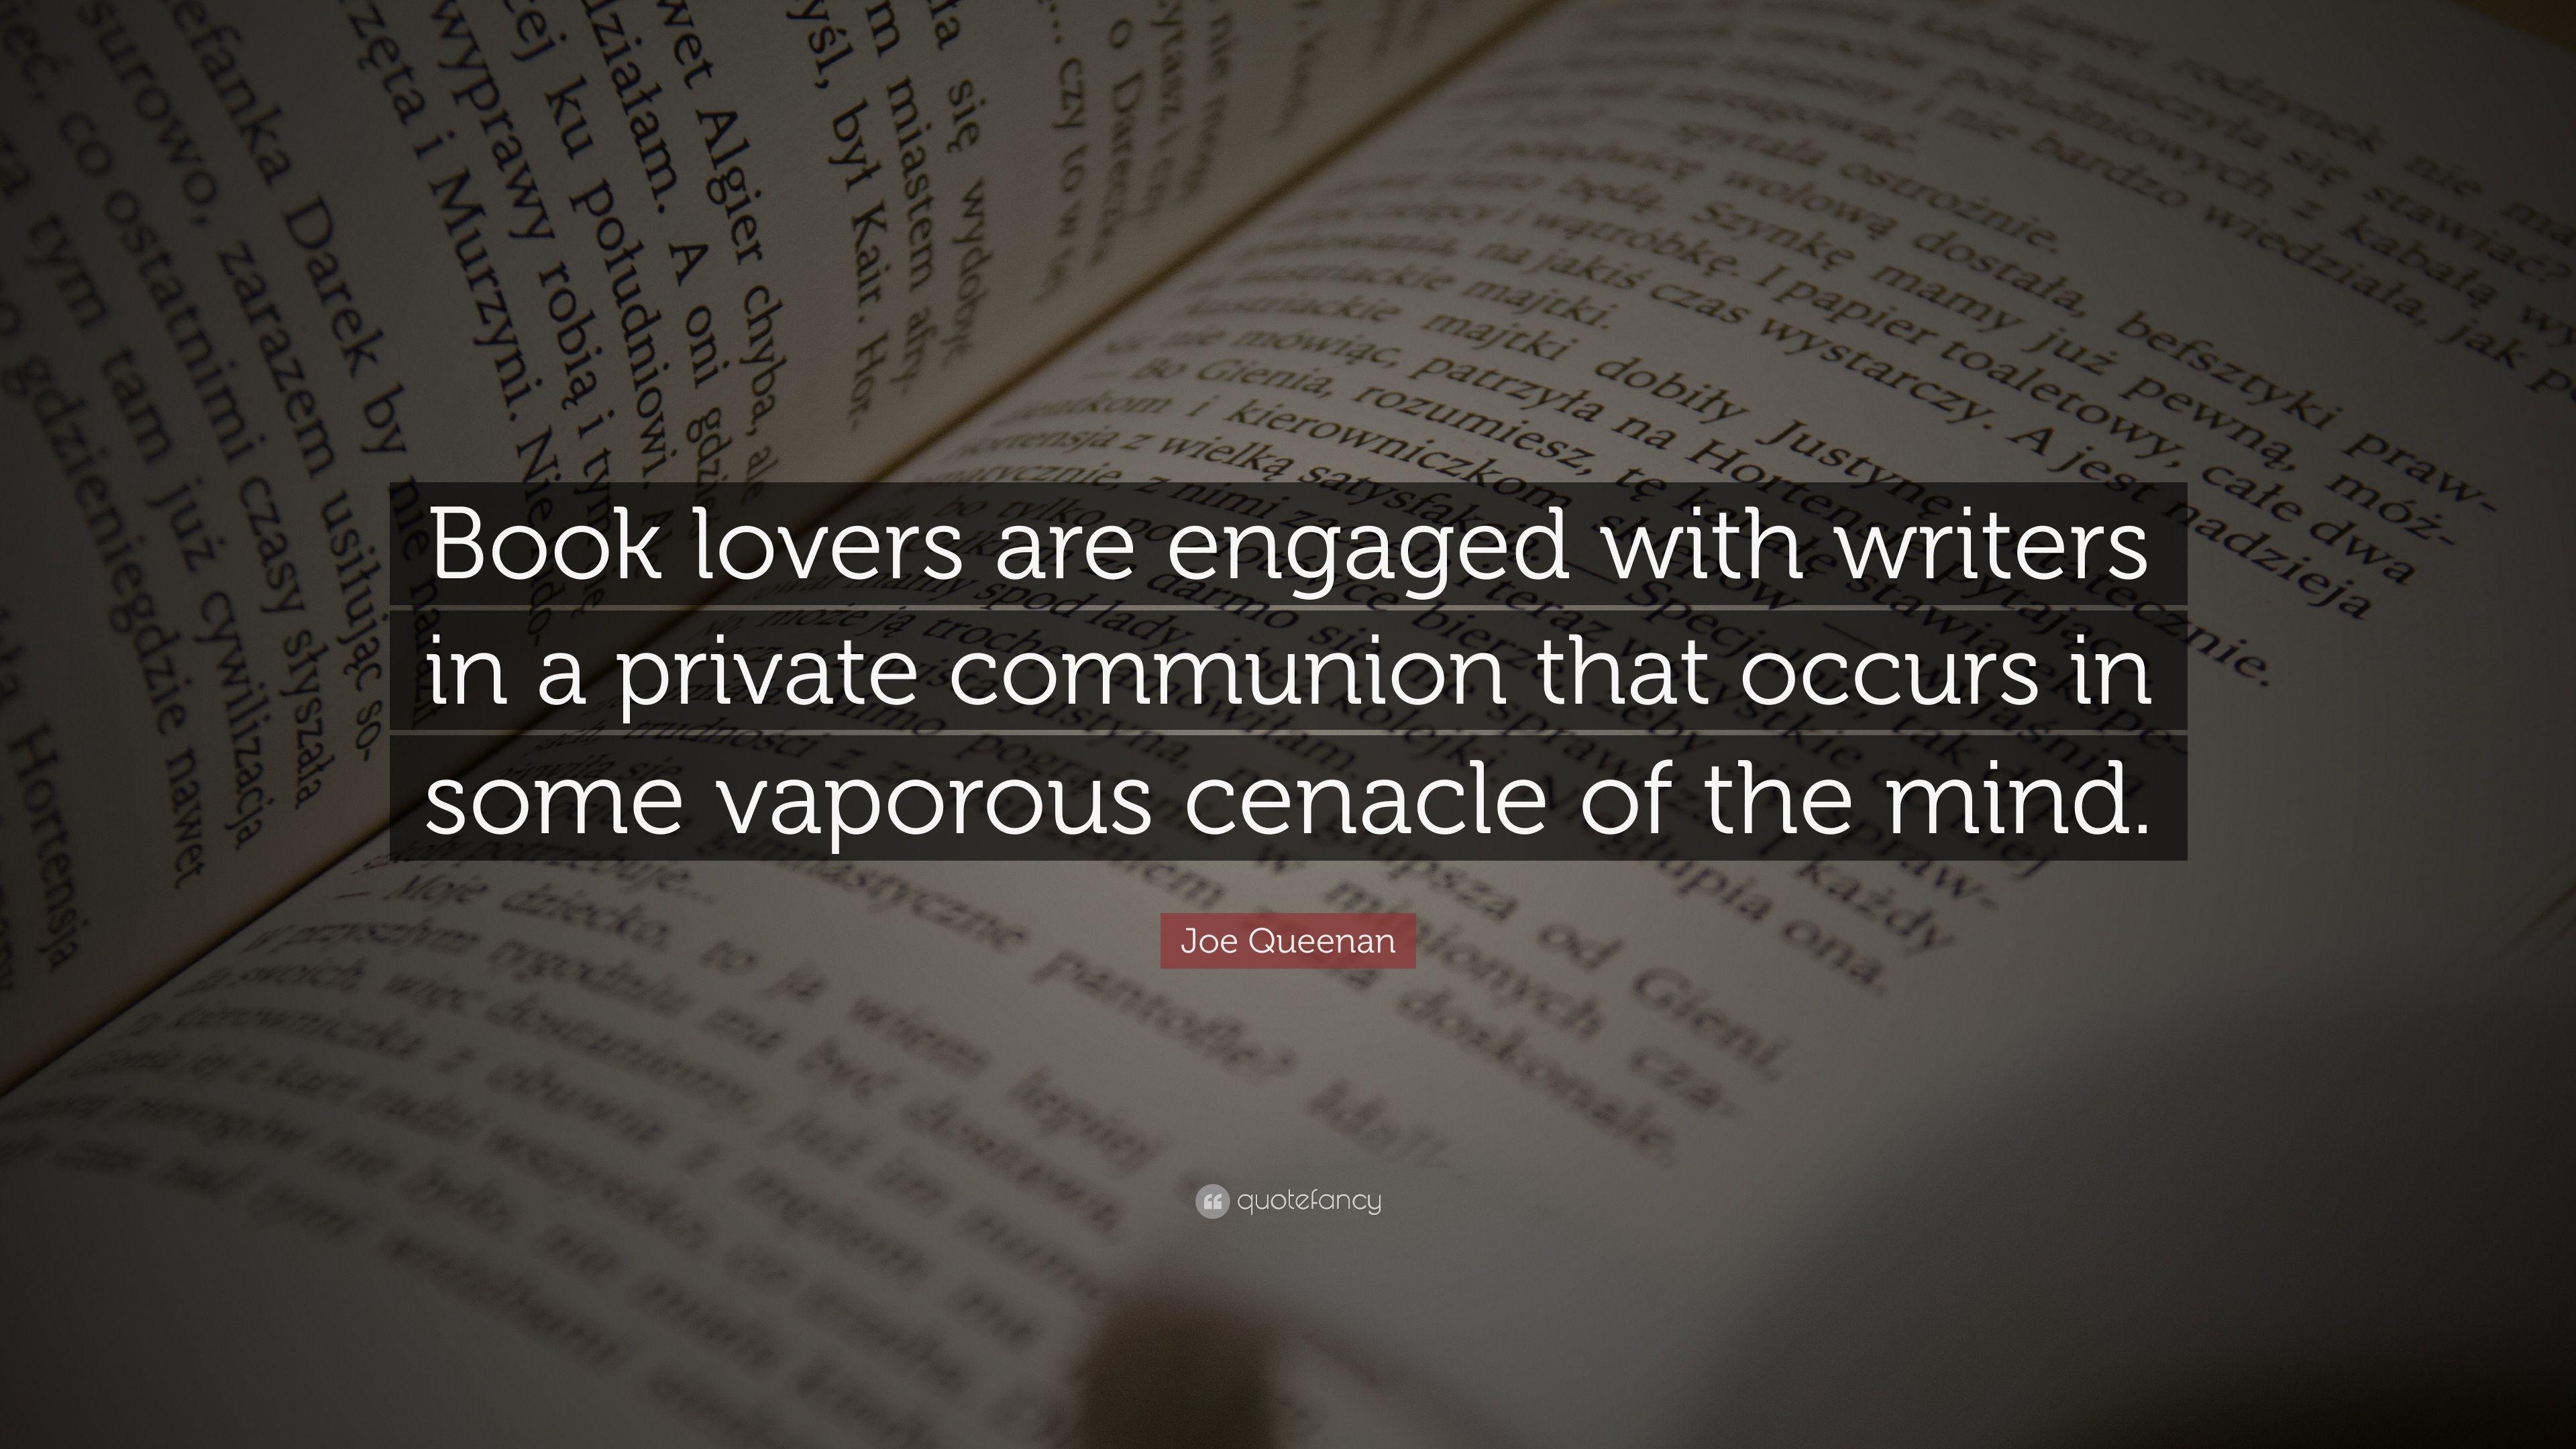 Joe Queenan Quote: “Book lovers are engaged with writers in a